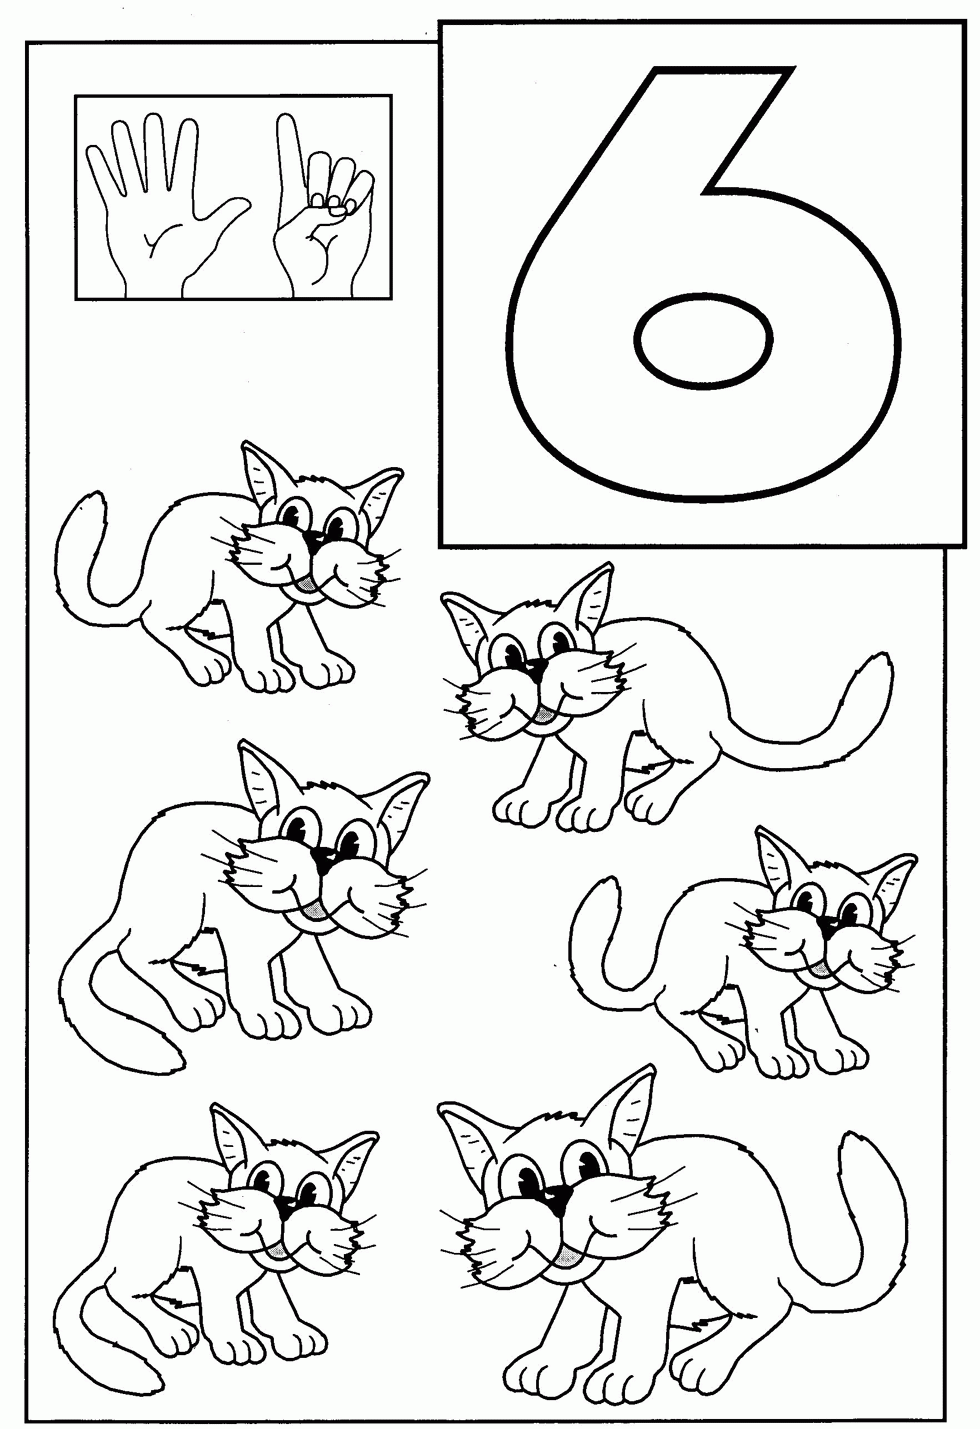 number 6 colouring pages number 6 coloring page coloring home number colouring pages 6 